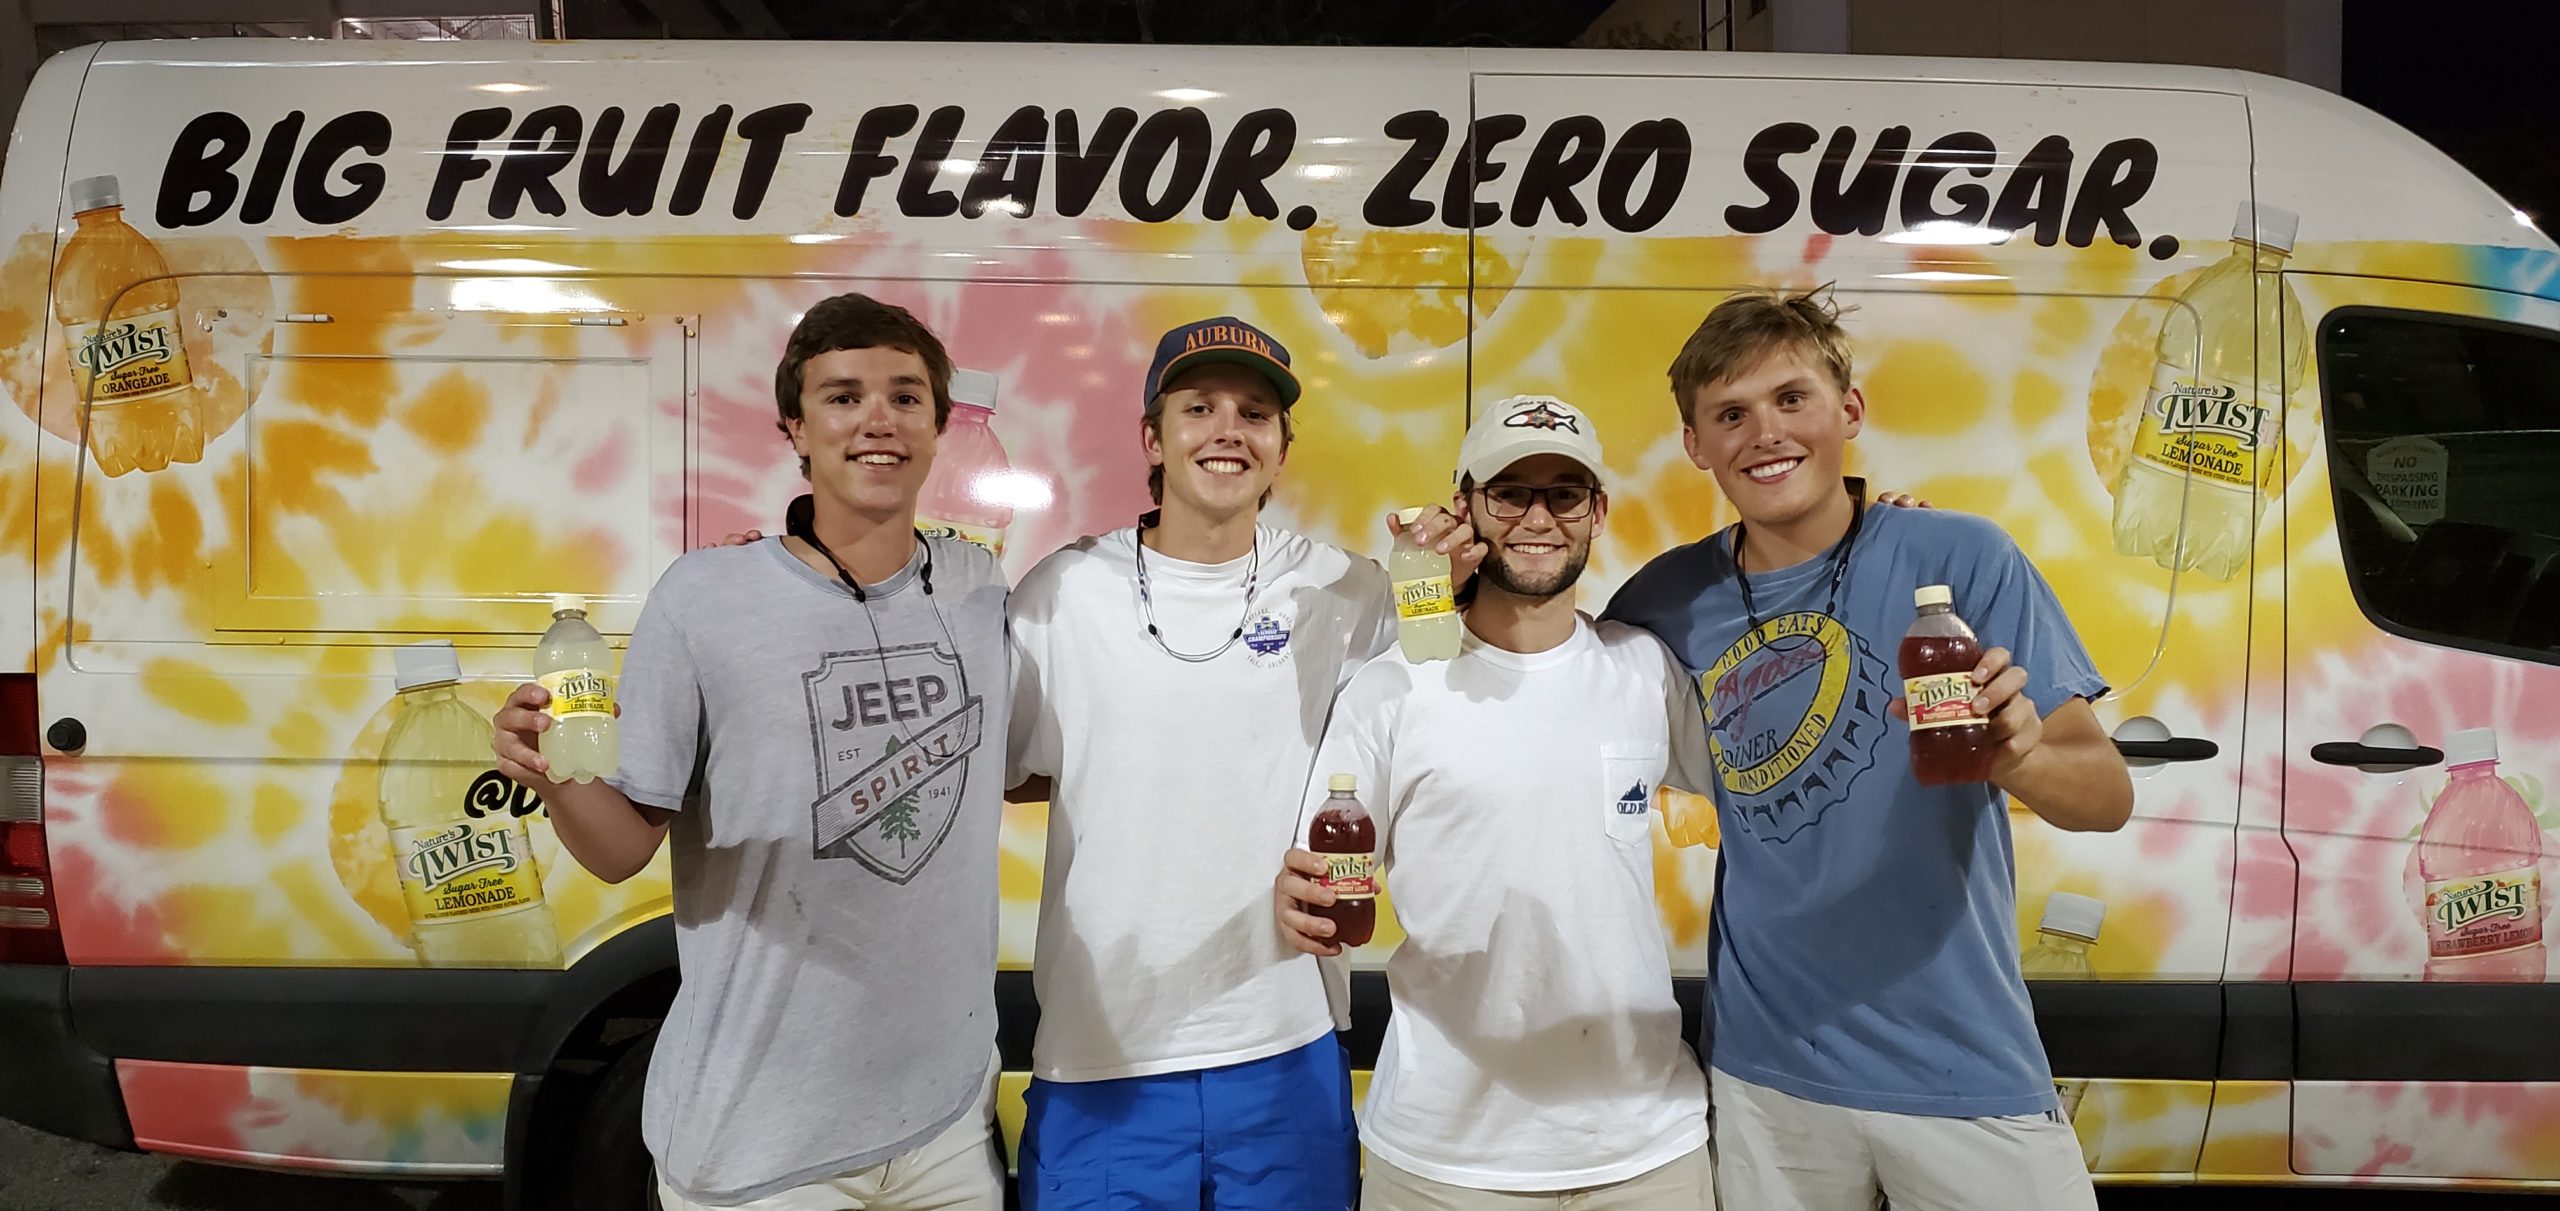 People posing in front of a flavored drinks snack truck